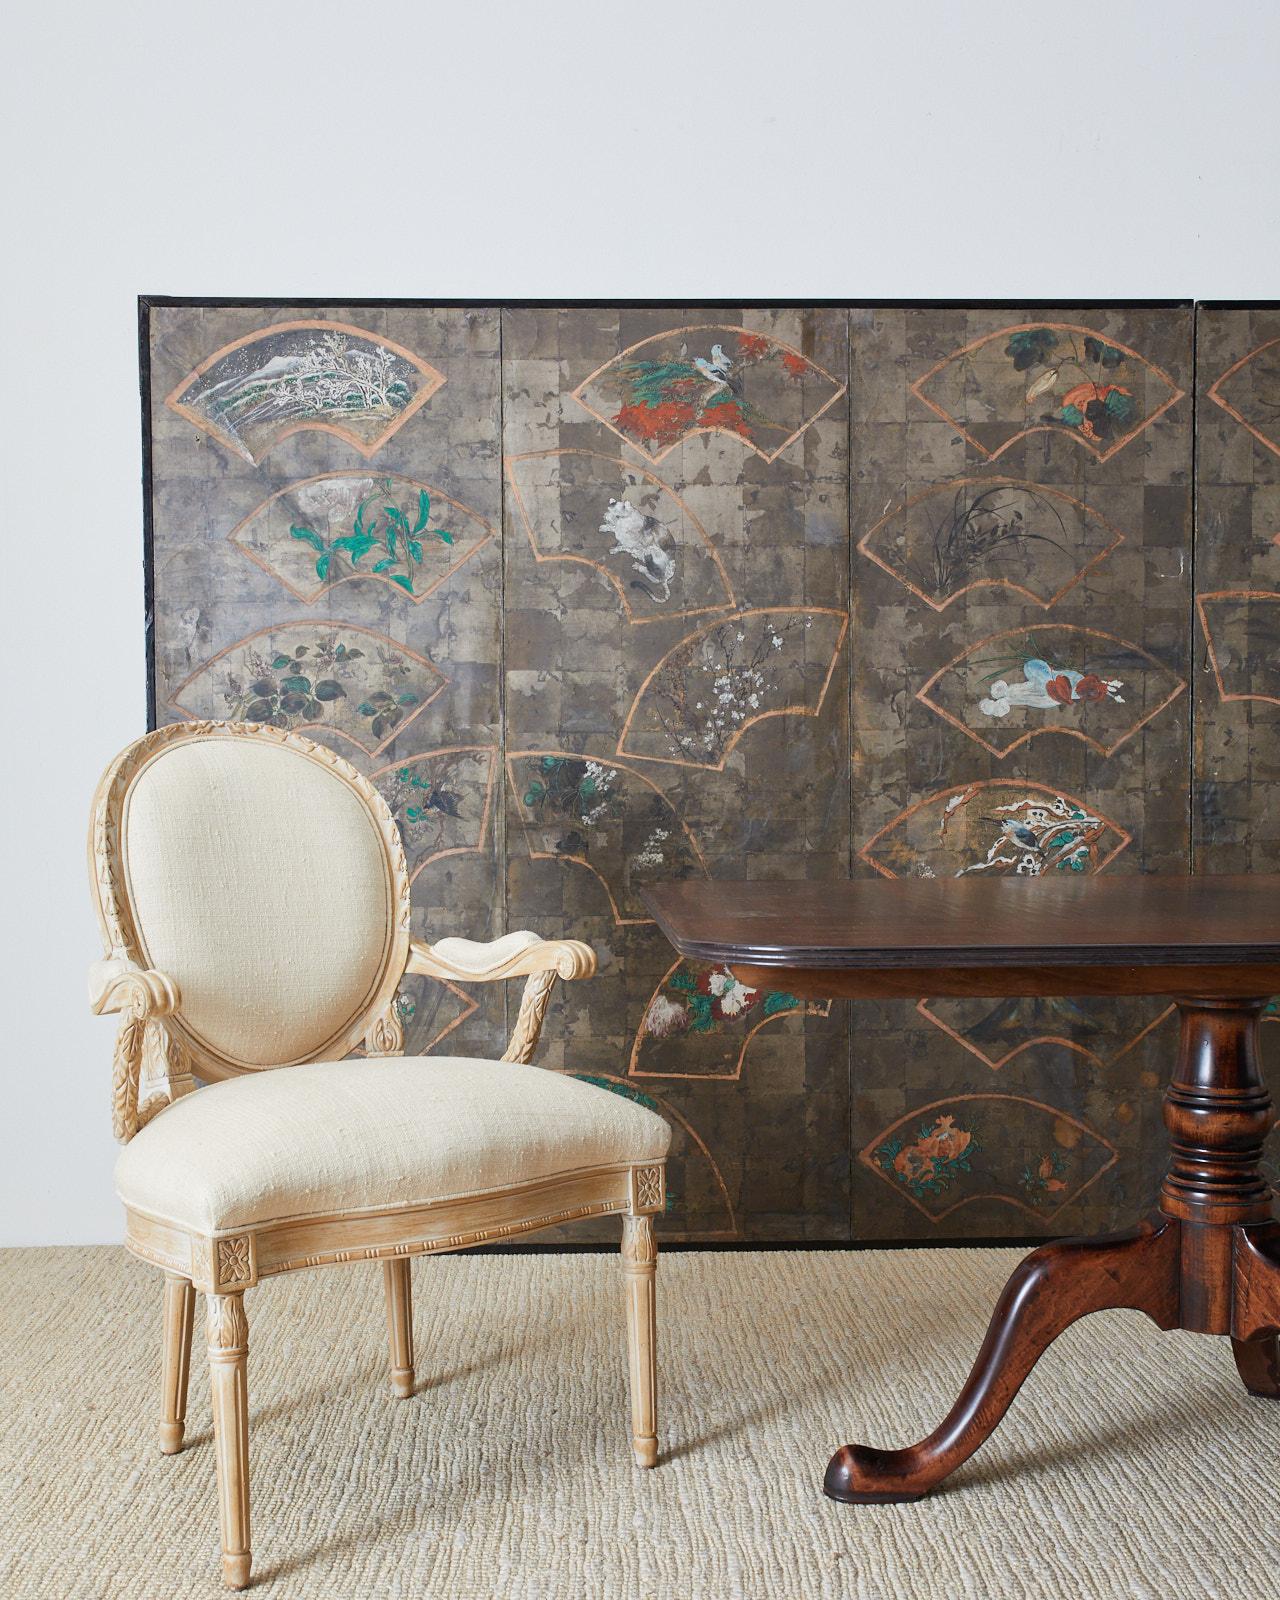 Large scale dramatic Japanese late 19th-early 20th century Meiji screen depicting numerous beautifully painted fans over a silver leaf square background. Originally a six-panel screen now conjoined into a large two-panel screen. The painted fans are